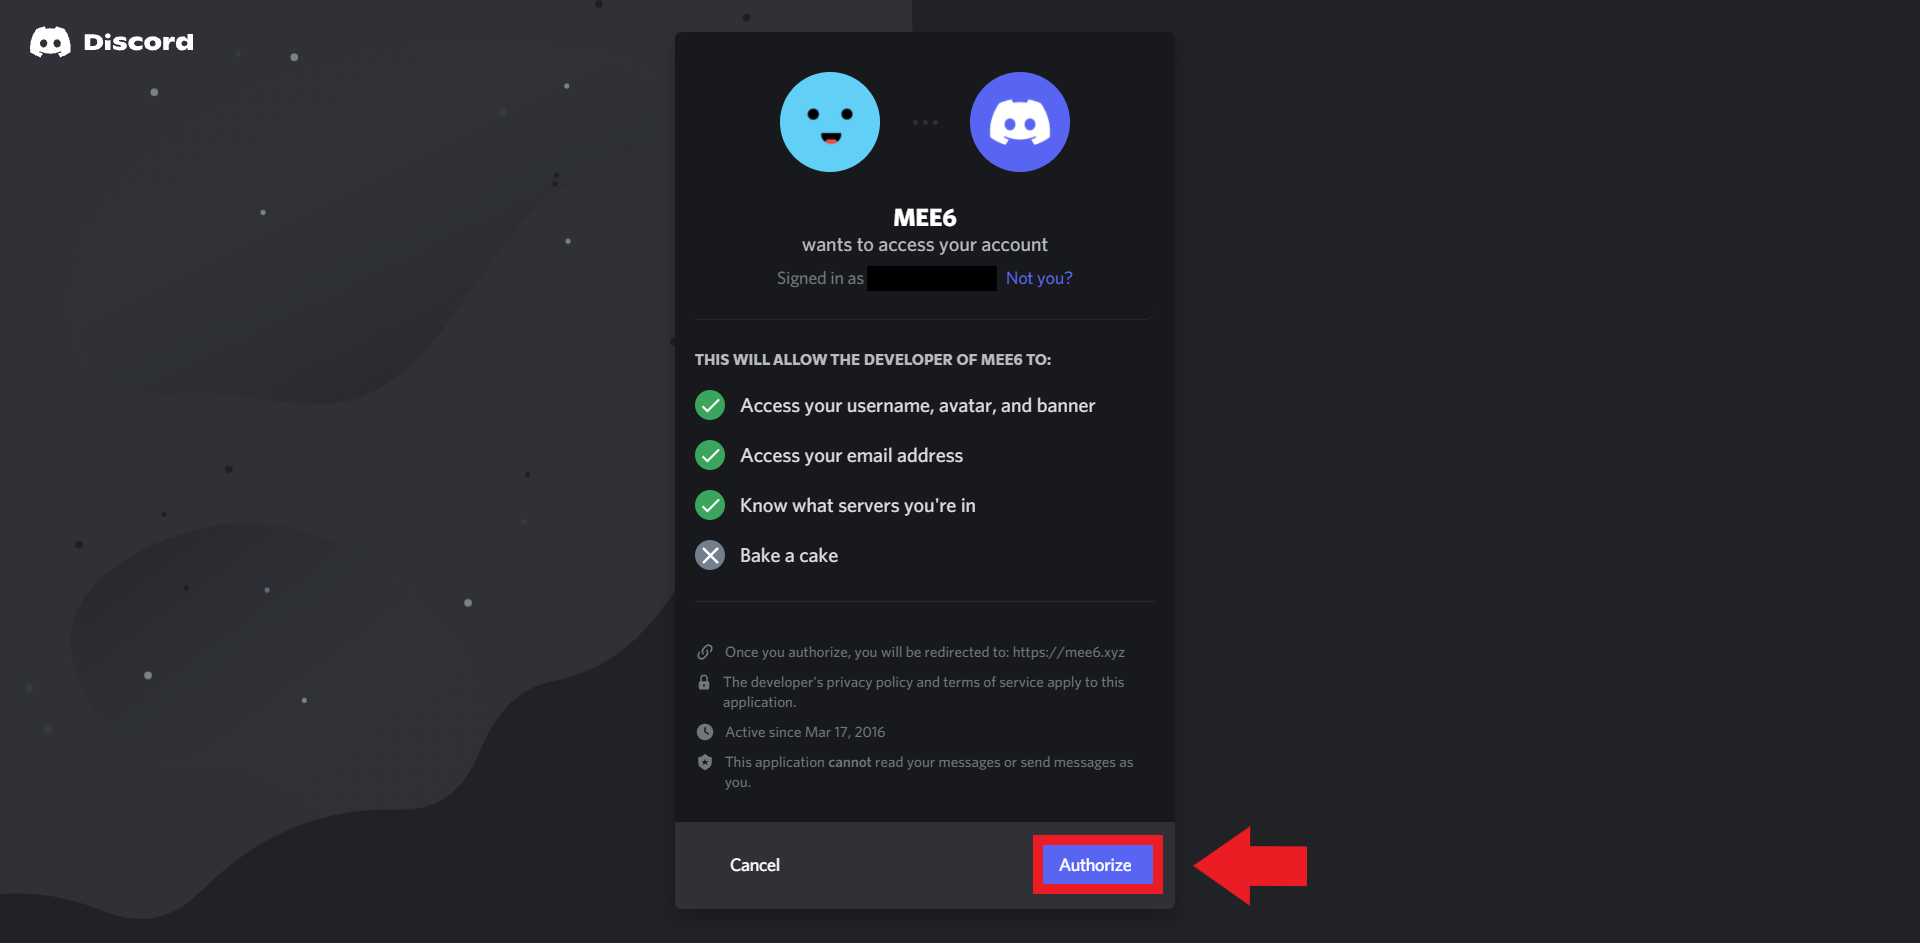 Mee6 Tutorial: How to use the Mee6 Dashboard on Discord?